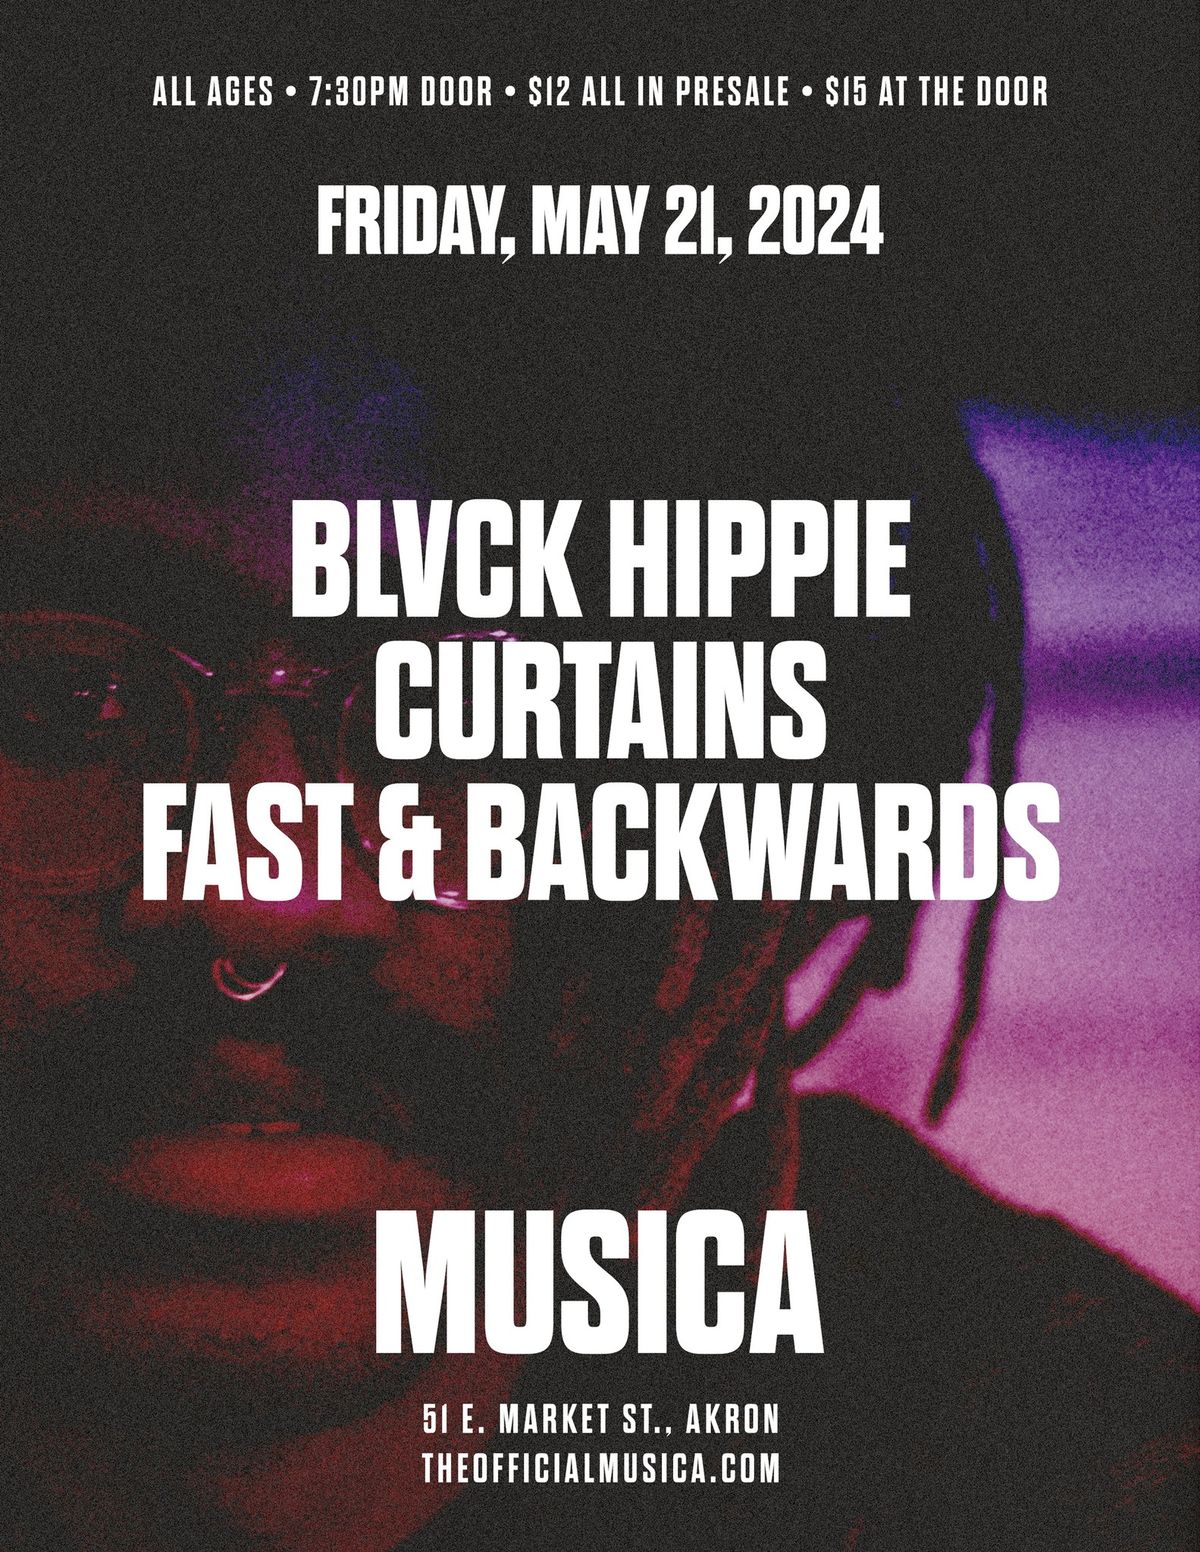 Blvck Hippie w\/ Curtains and Fast & Backwards at Musica